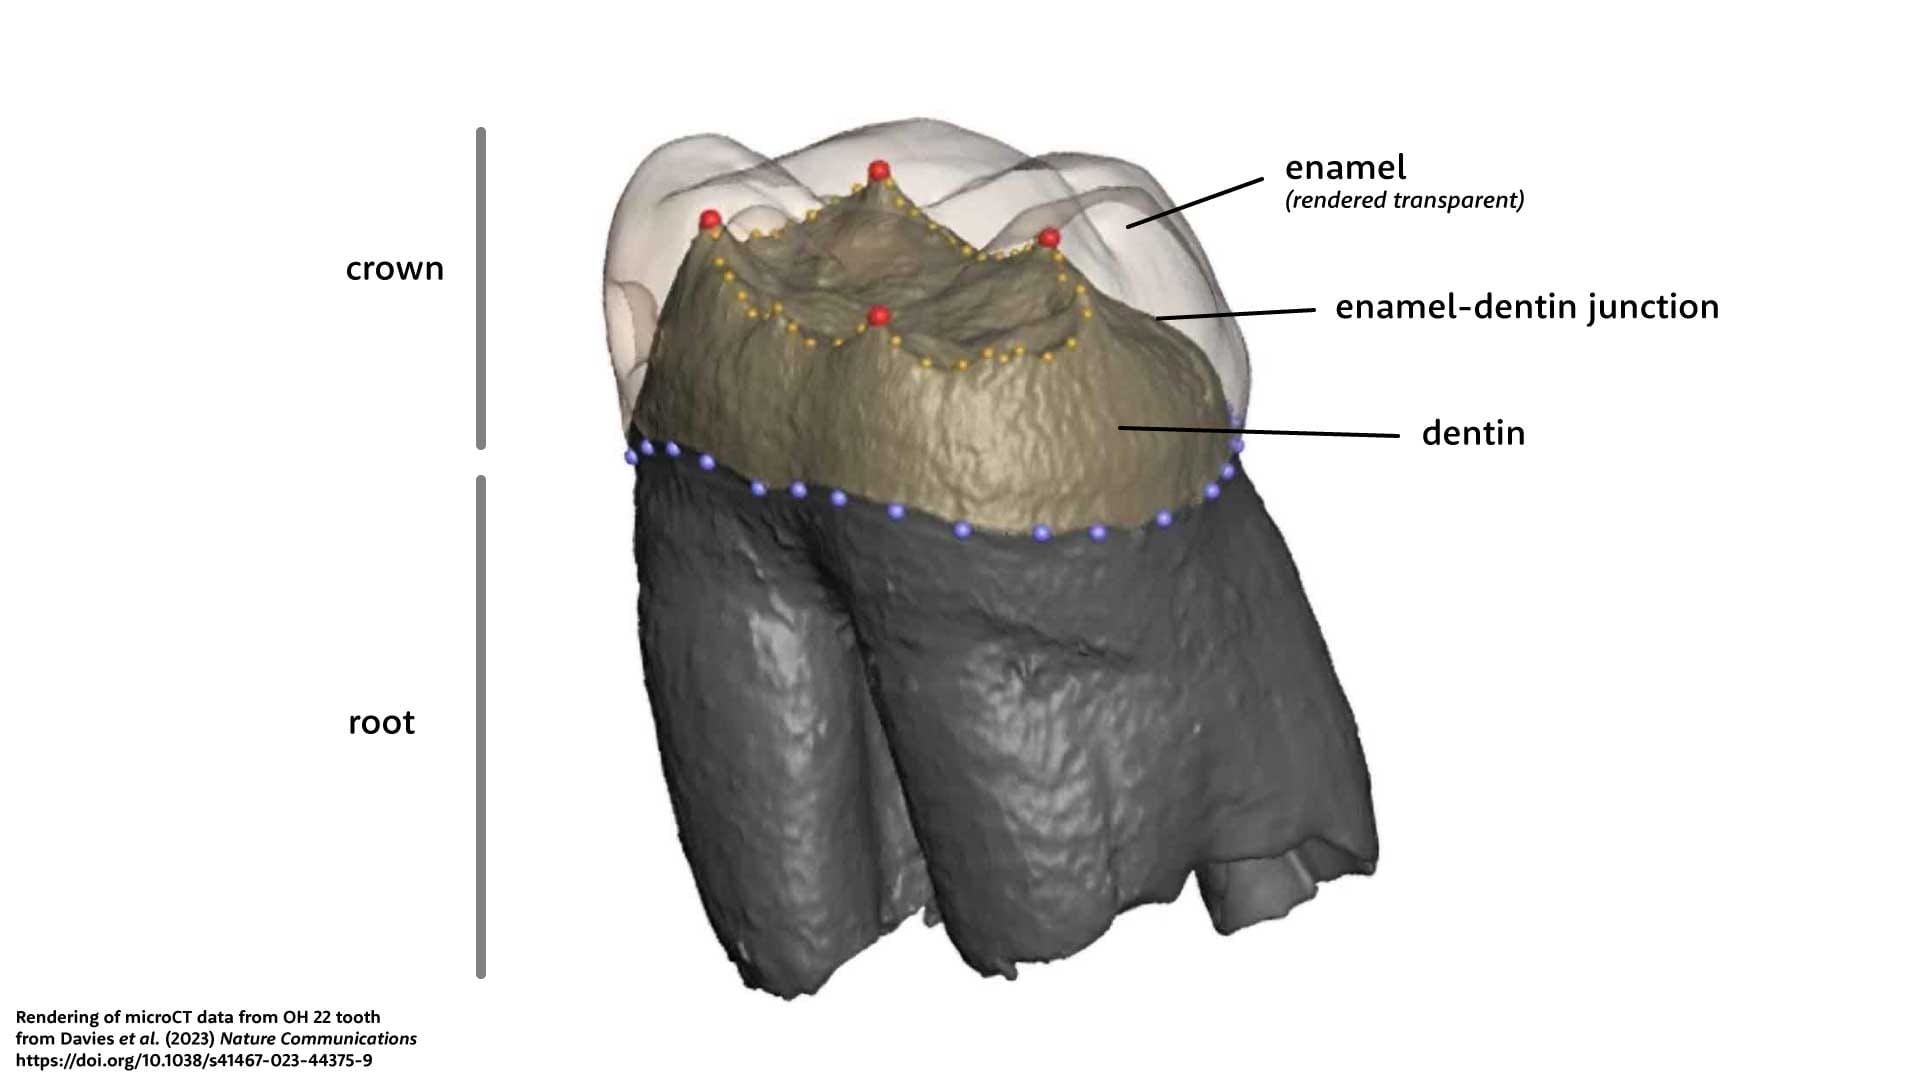 Three-dimensional rendering of a tooth showing the enamel crown with transparency to make the internal dentin visible, and the enamel-dentin junction labeled.